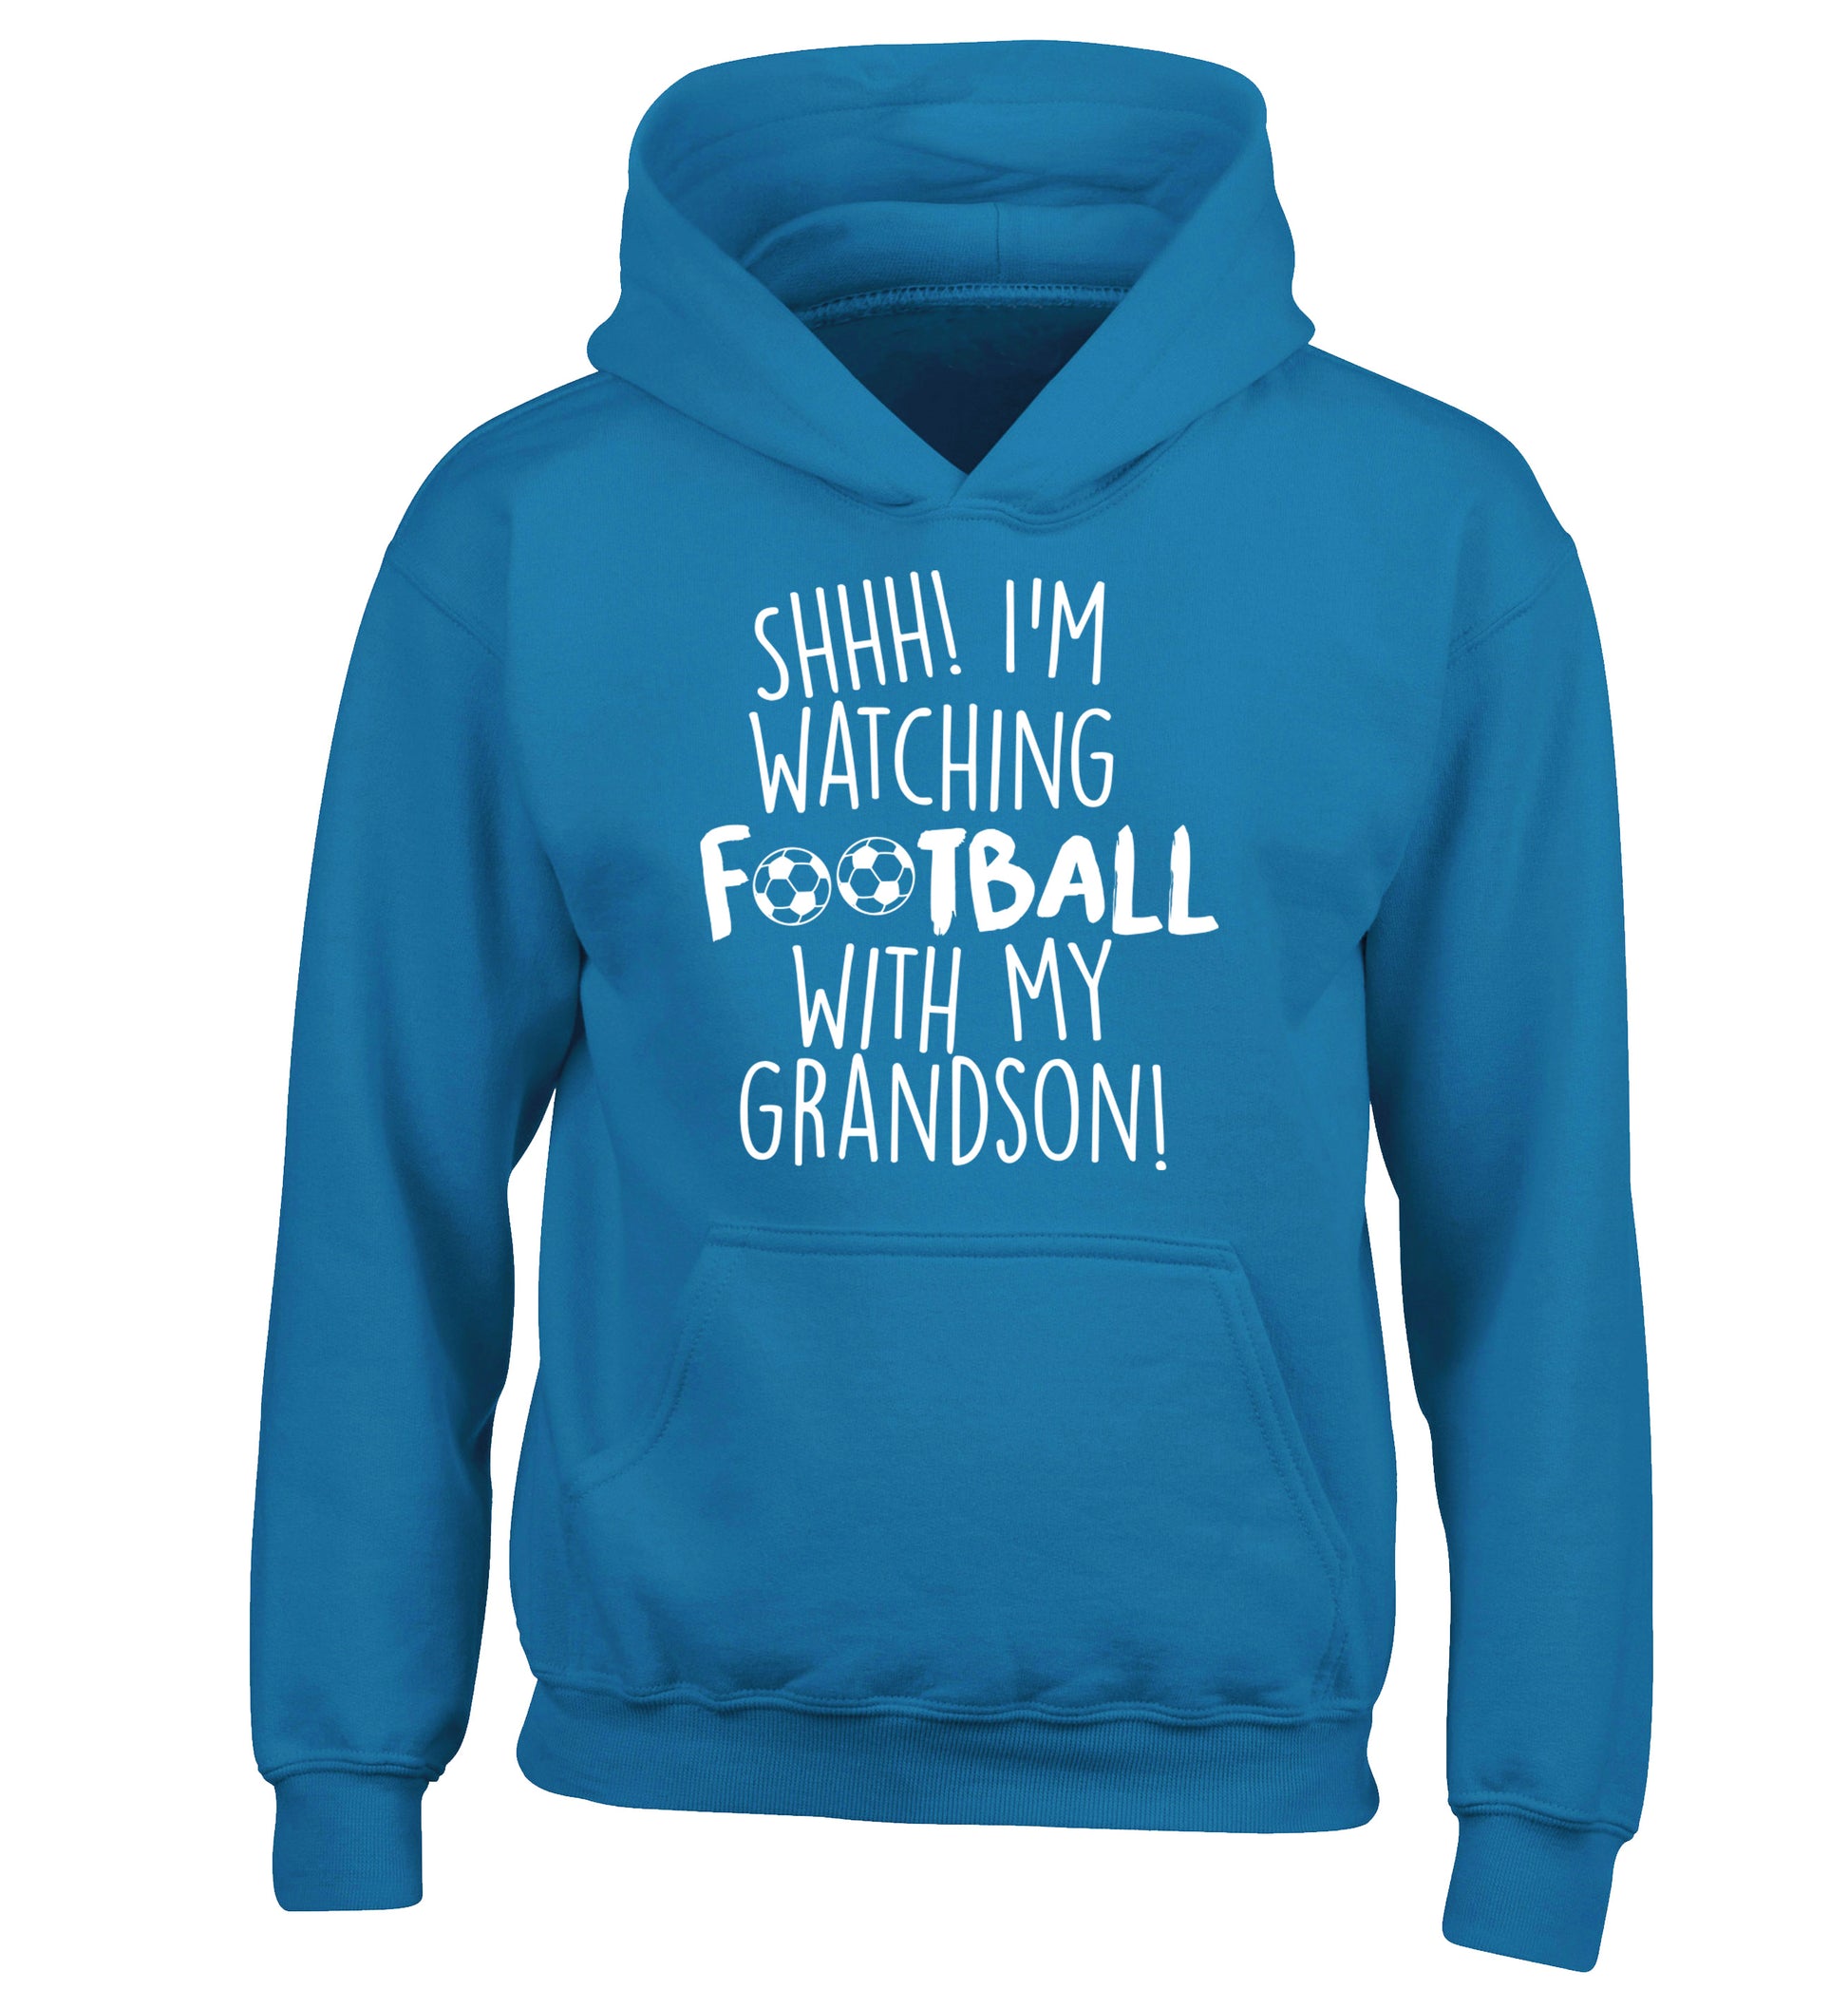 Shhh I'm watching football with my grandson children's blue hoodie 12-14 Years